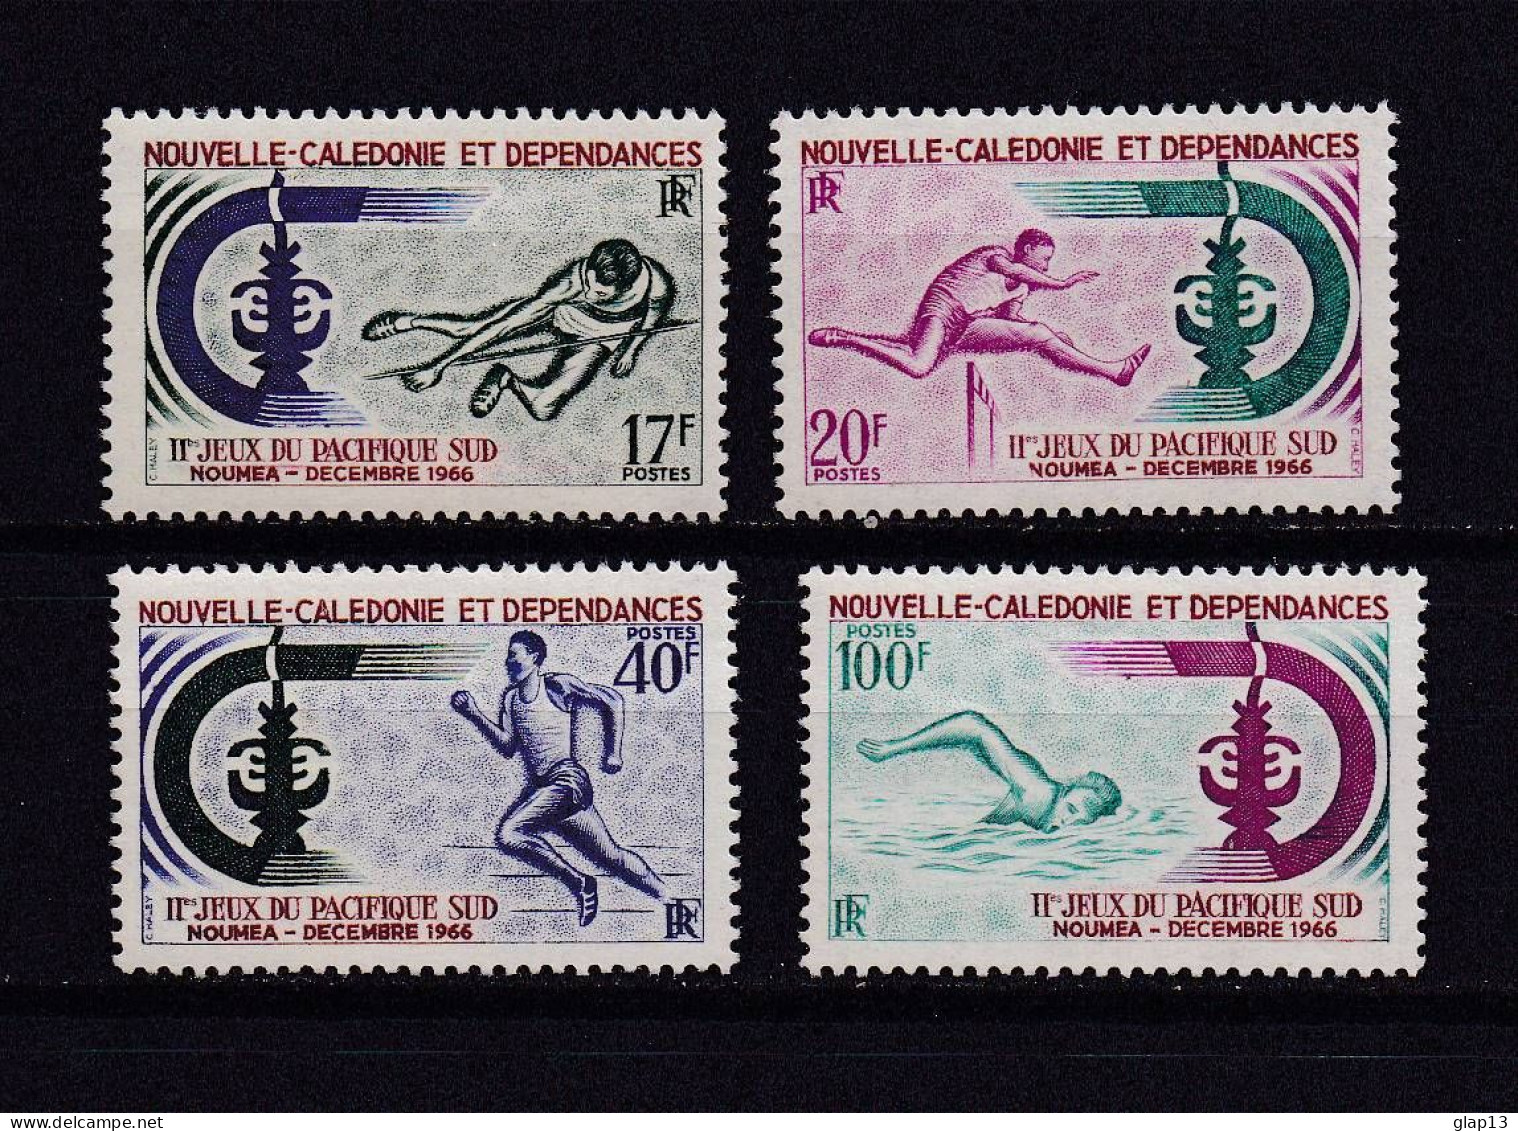 NOUVELLE-CALEDONIE 1966 TIMBRE N°332/35 NEUF AVEC CHARNIERE SPORTS - Nuovi